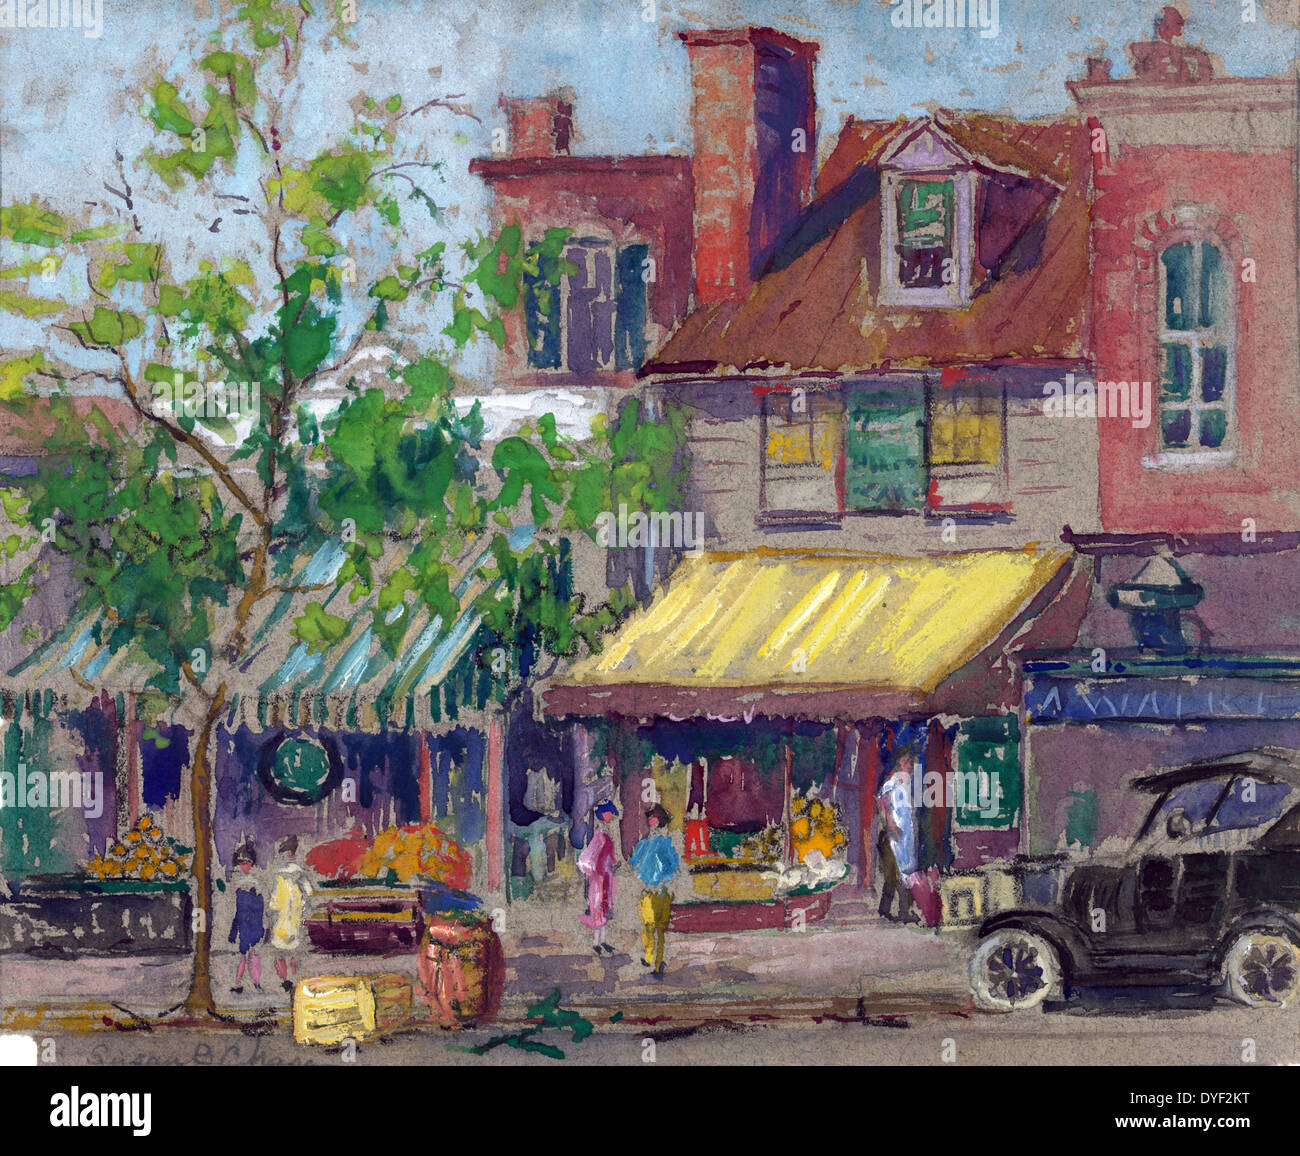 Pa. Ave bet. 22 & 23 Washington DC by artist Susan Brown Chase 1868-1948. Landscape drawing shows storefronts on Pennsylvania Avenue in Washington, DC between 22nd and 23rd streets. A shopkeeper stands in the doorway of one of the buildings. Women are on the sidewalk. A car is parked at the curb. Dated between 1920 and 1930 Stock Photo